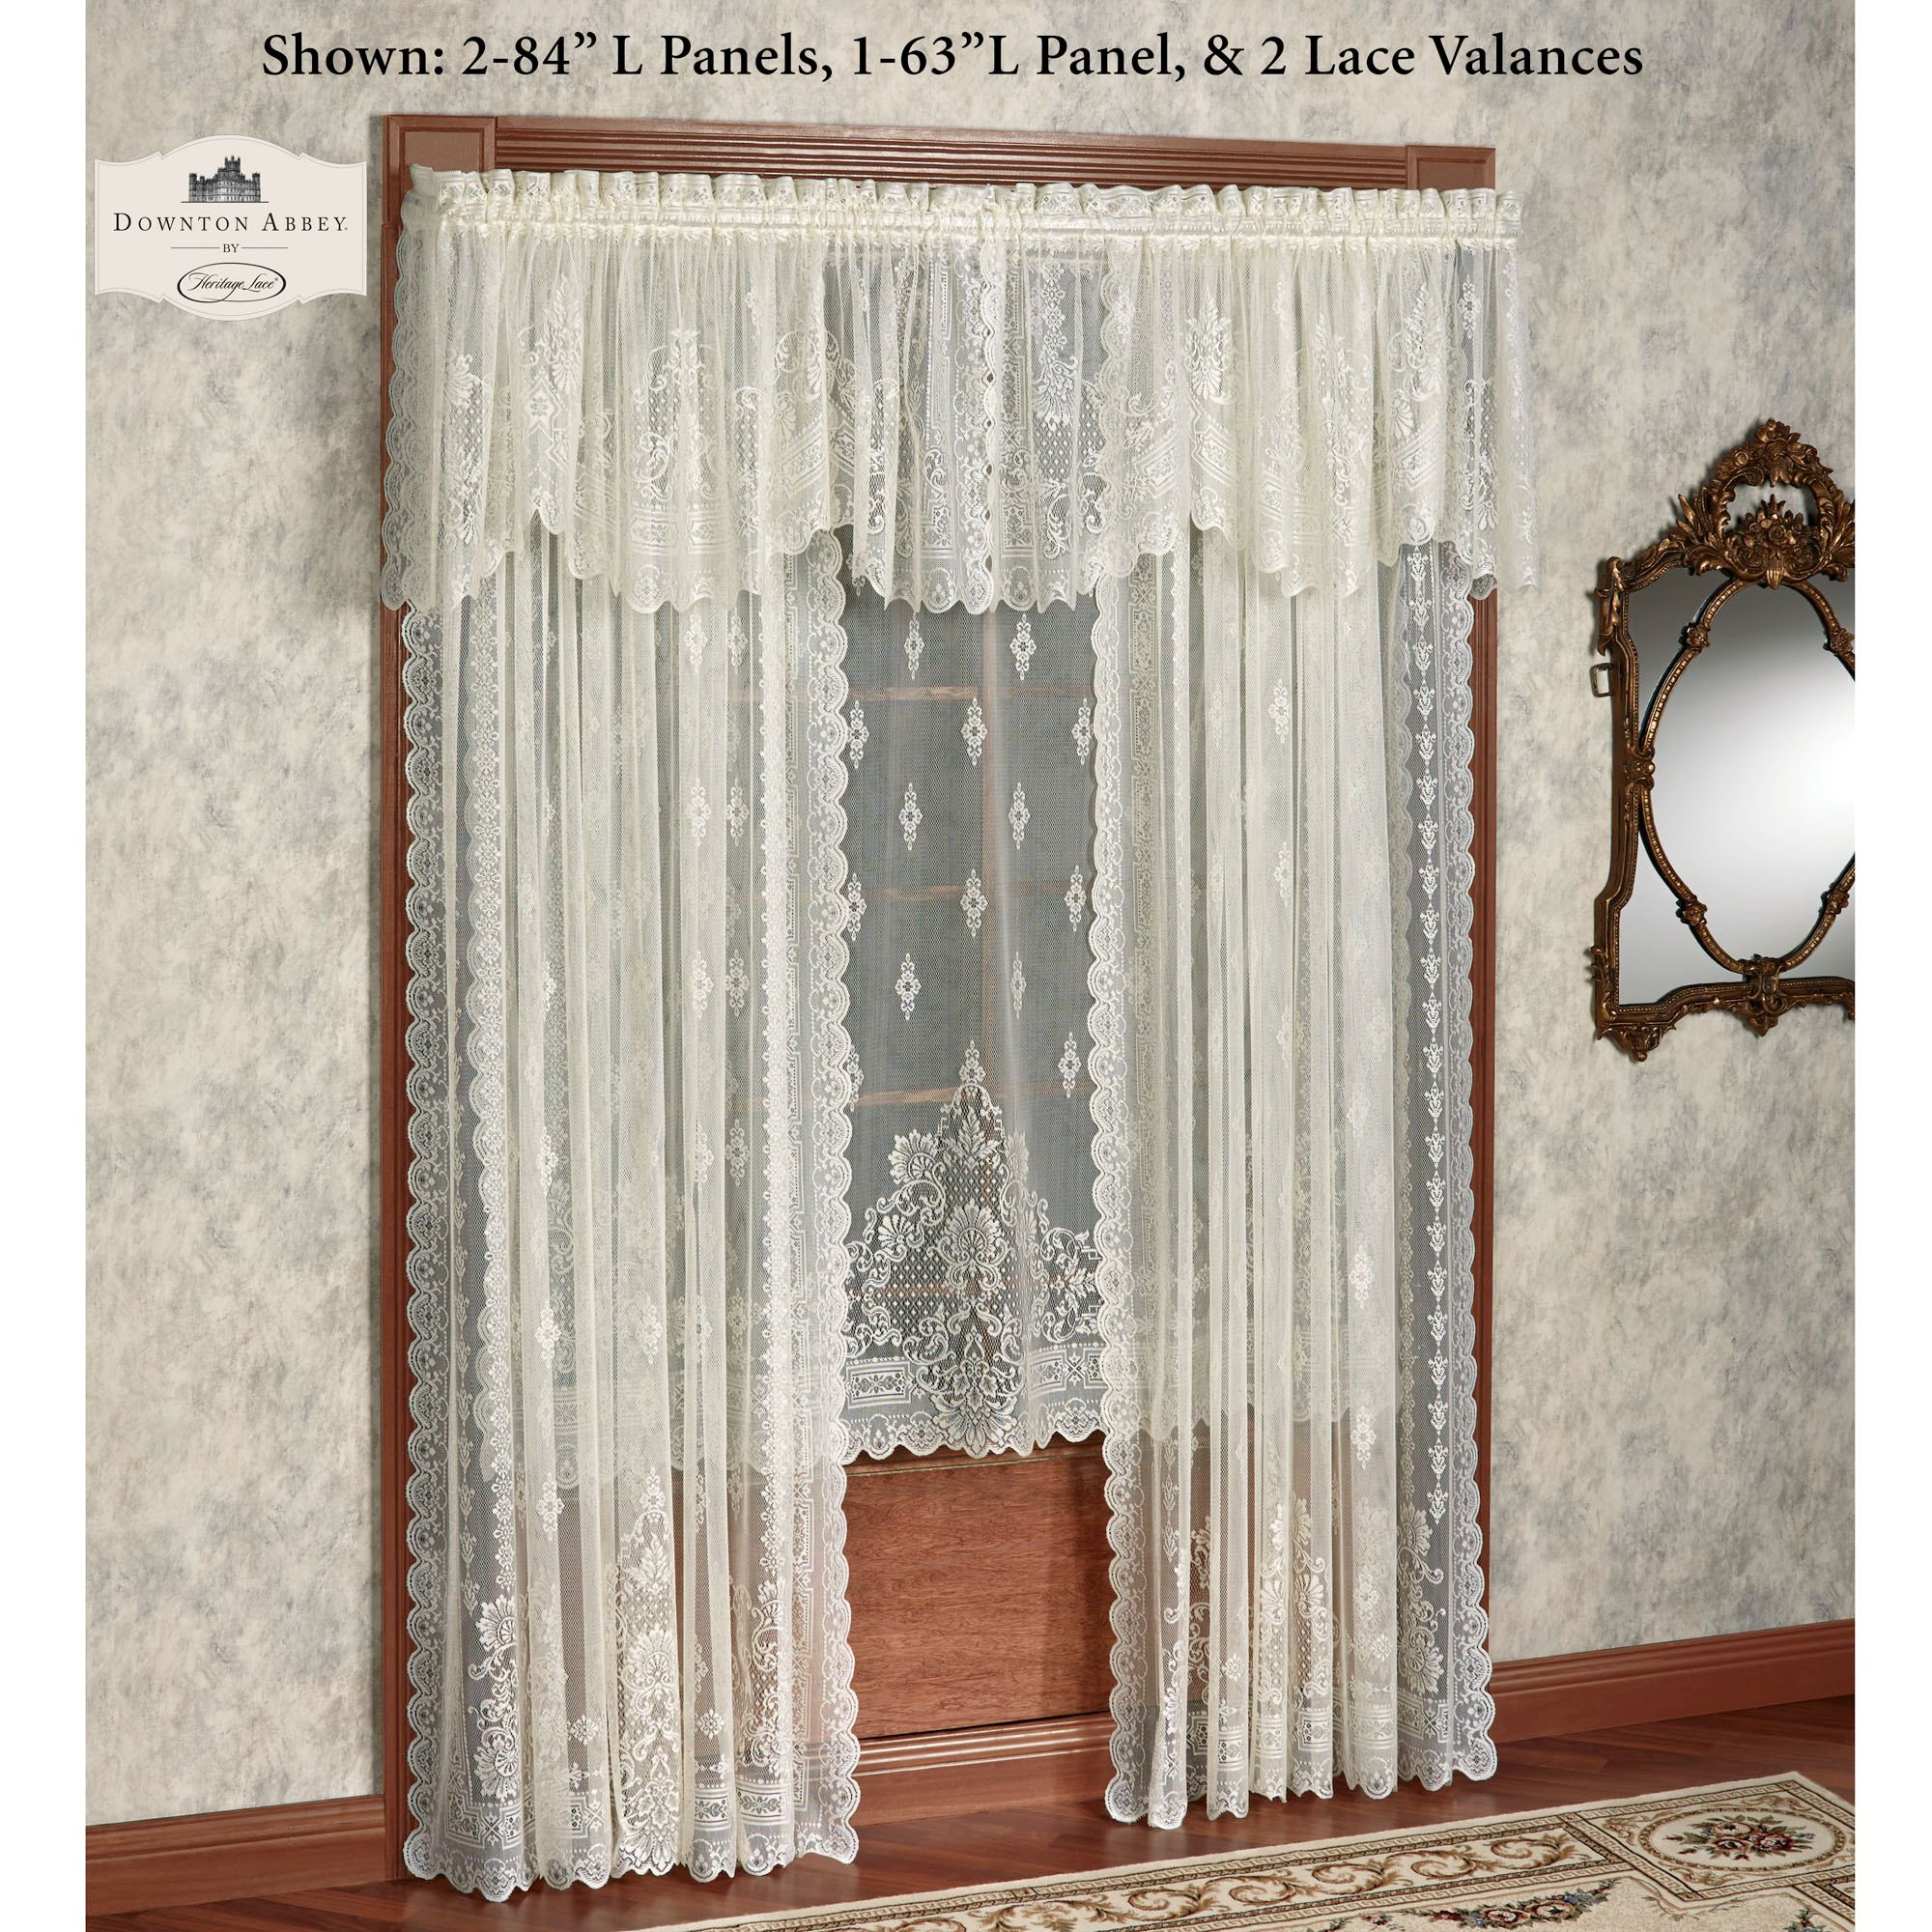 Kitchen Curtains At Jcpenney
 26 Jcpenney Curtain Sconces Decor Enchanting Jcpenney